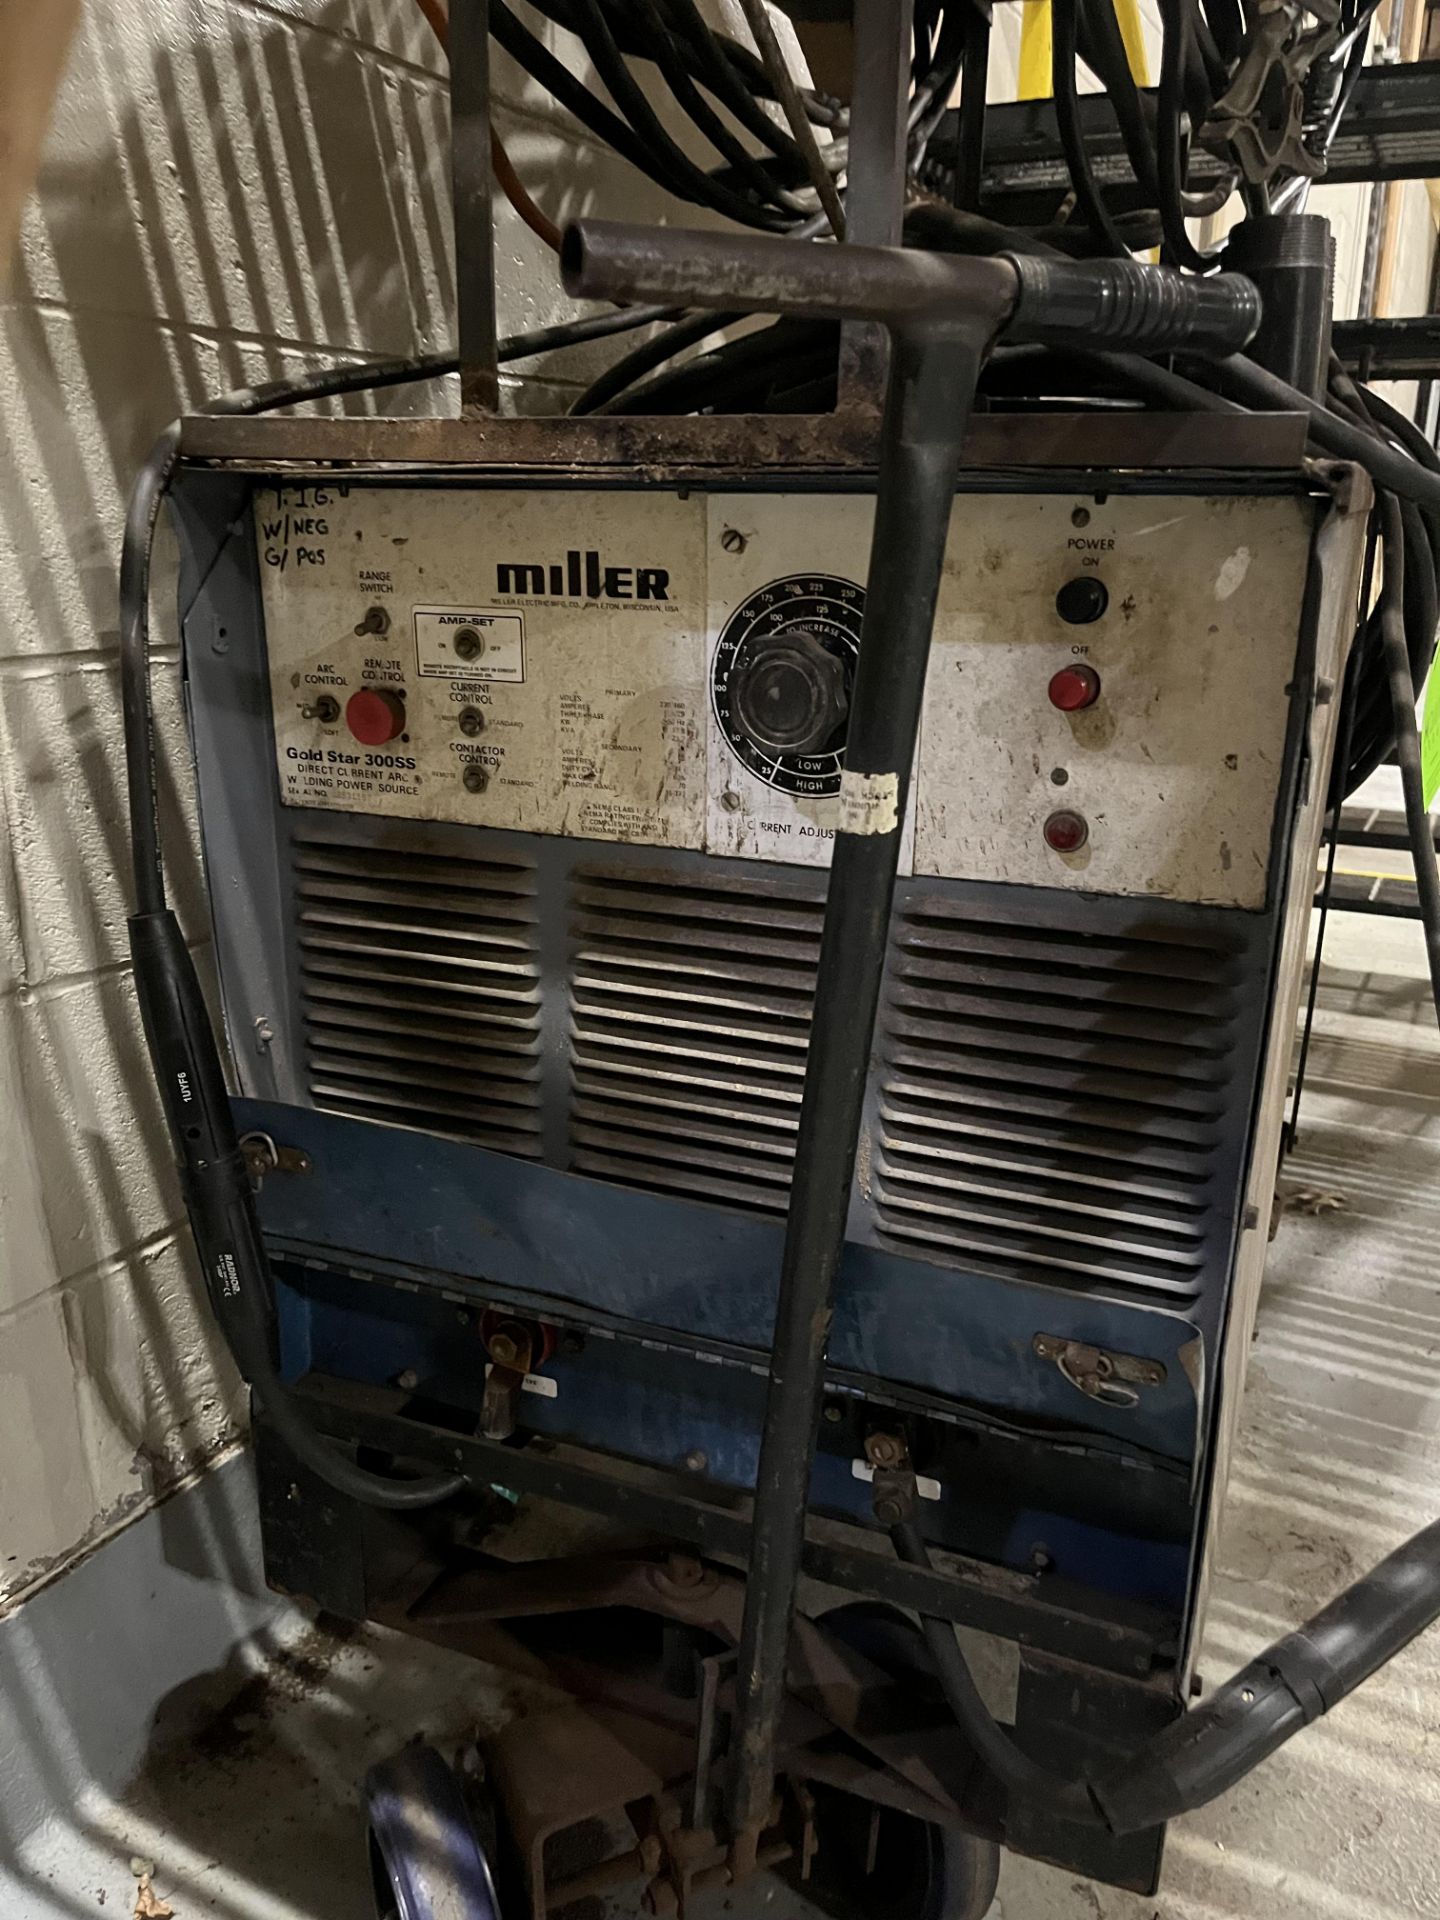 MILLER GOLD STAR 300SS DIRECT CURRENT WELDING POWER SOURCE - Image 3 of 3